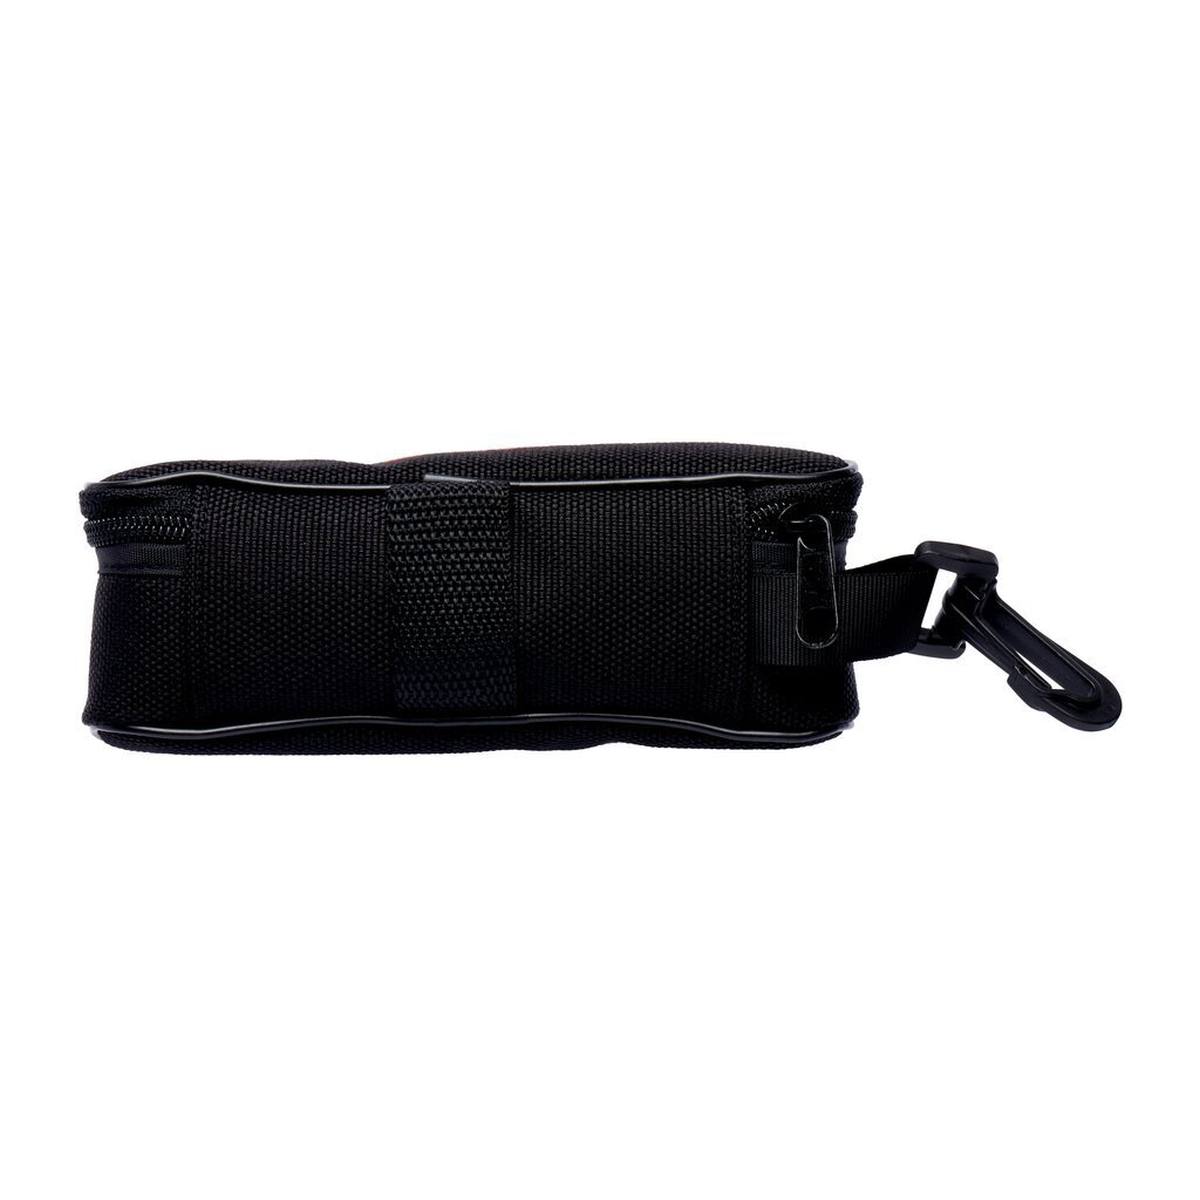 3M Soft glasses case with zip fastener, snap compartment and belt loop, black case5